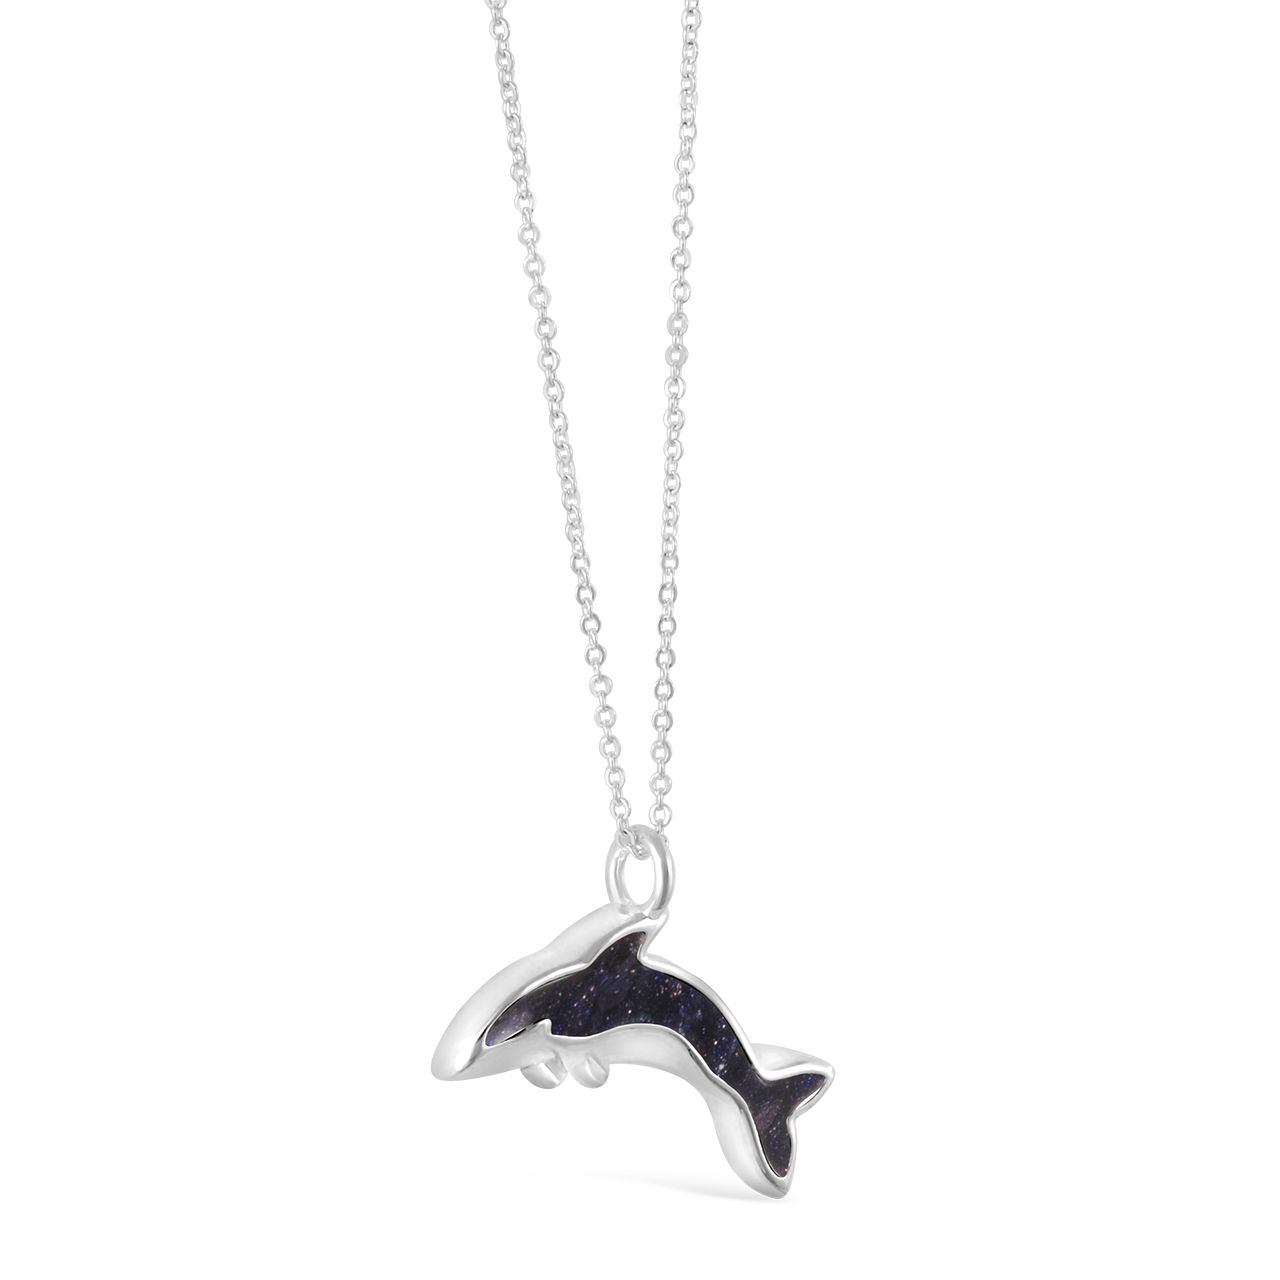 Sterling silver ocean-inspired necklace with an adjustable cable chain, orca whale pendant and sand and earth elements.